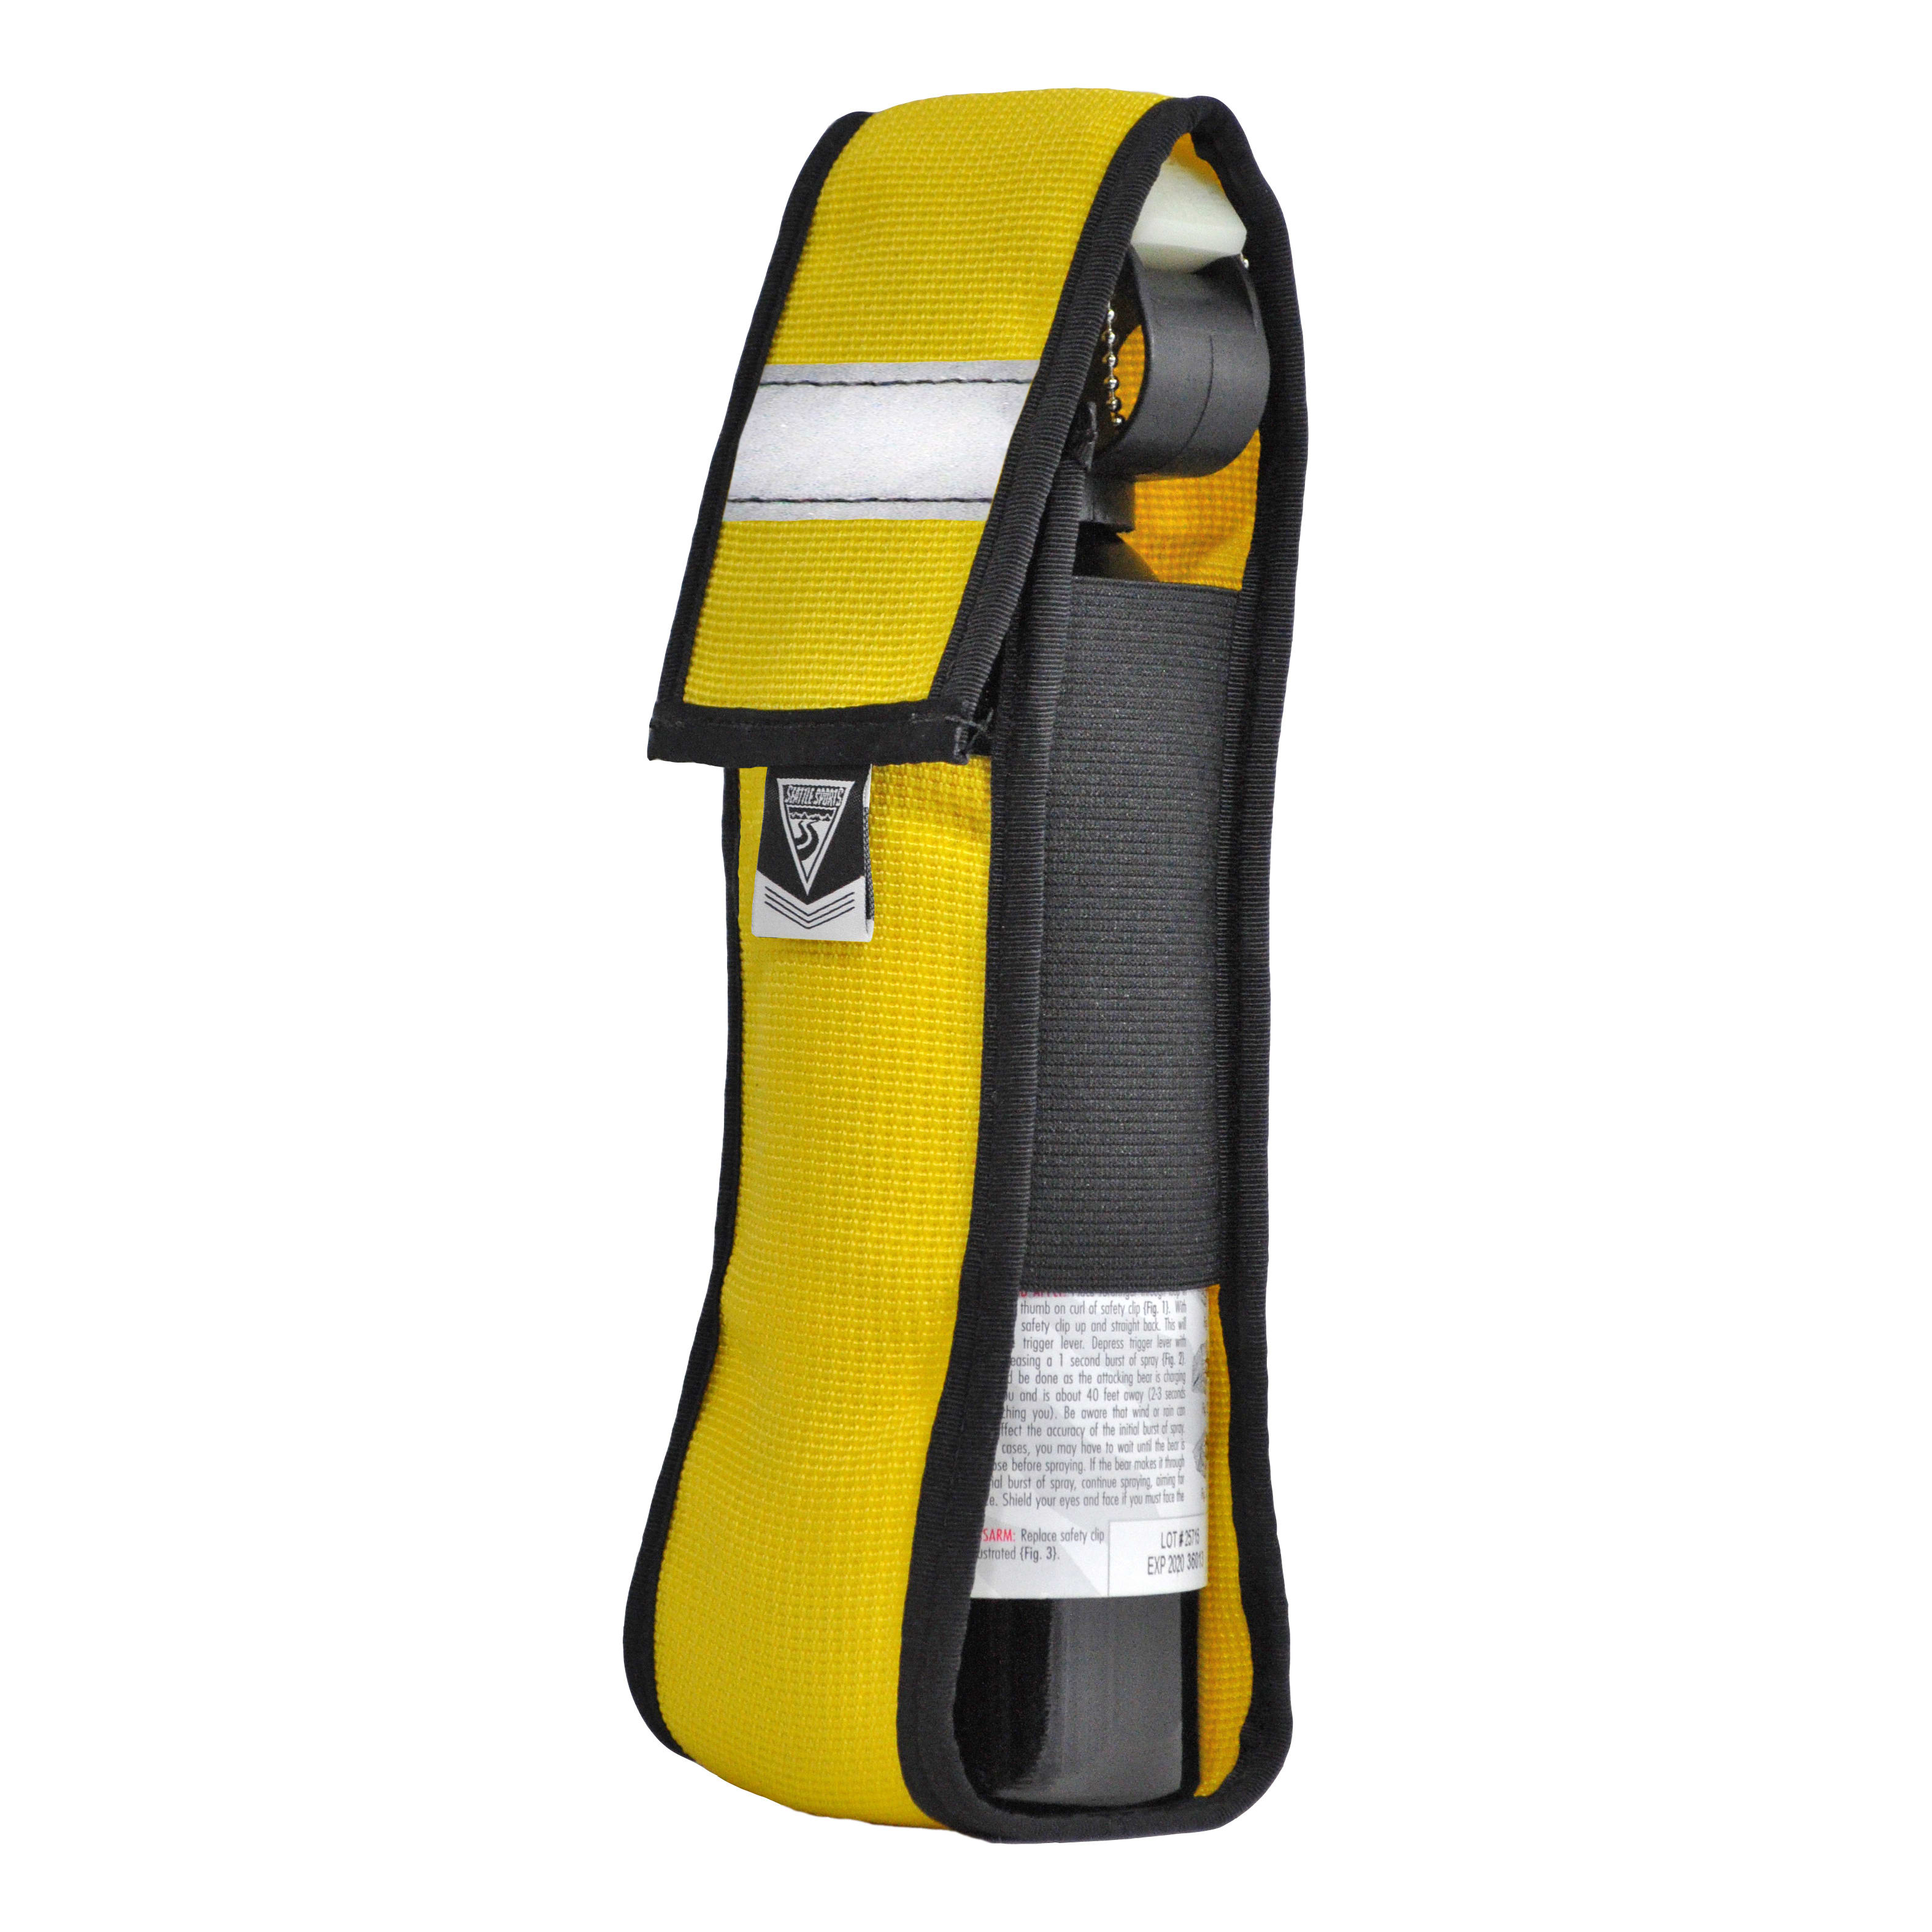 Magnum Bear Spray Holster - Yellow - Angle View